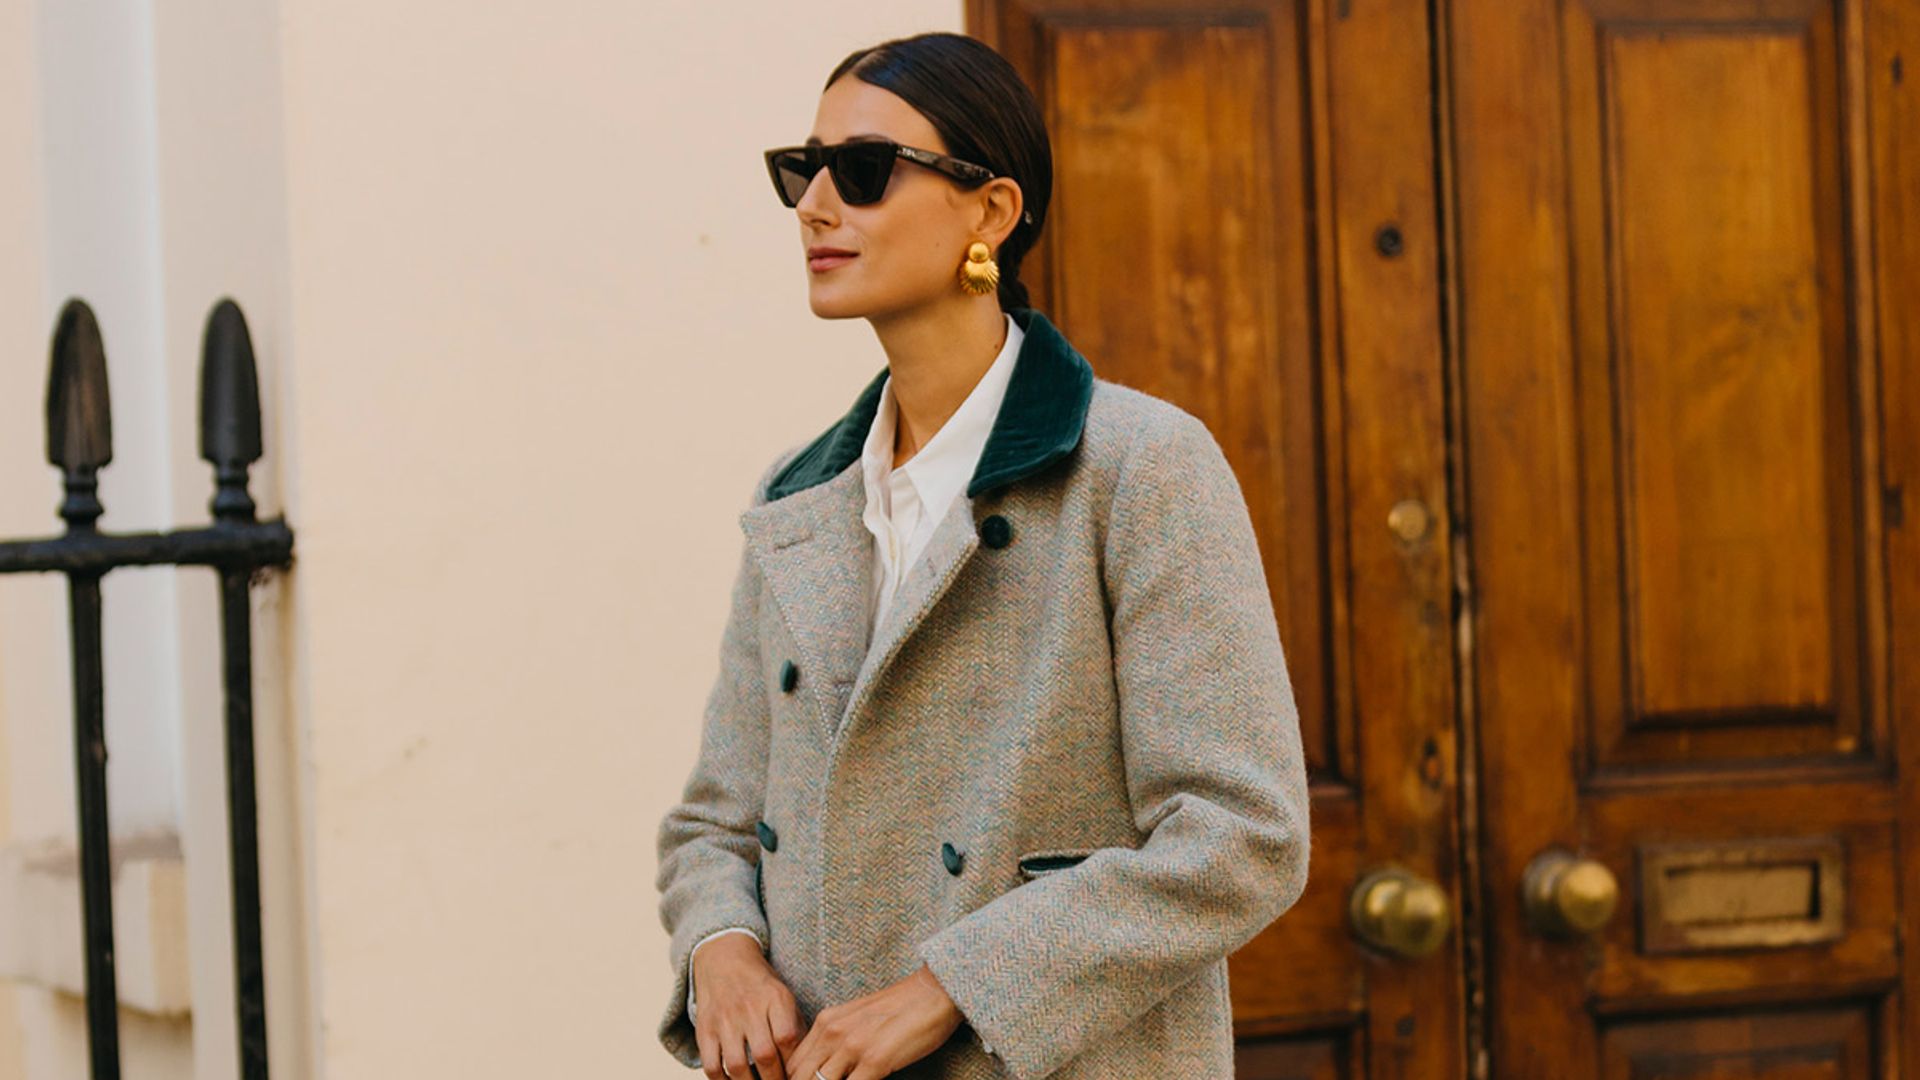 Winter outfits: 7 seriously stylish ways to dress for the cold